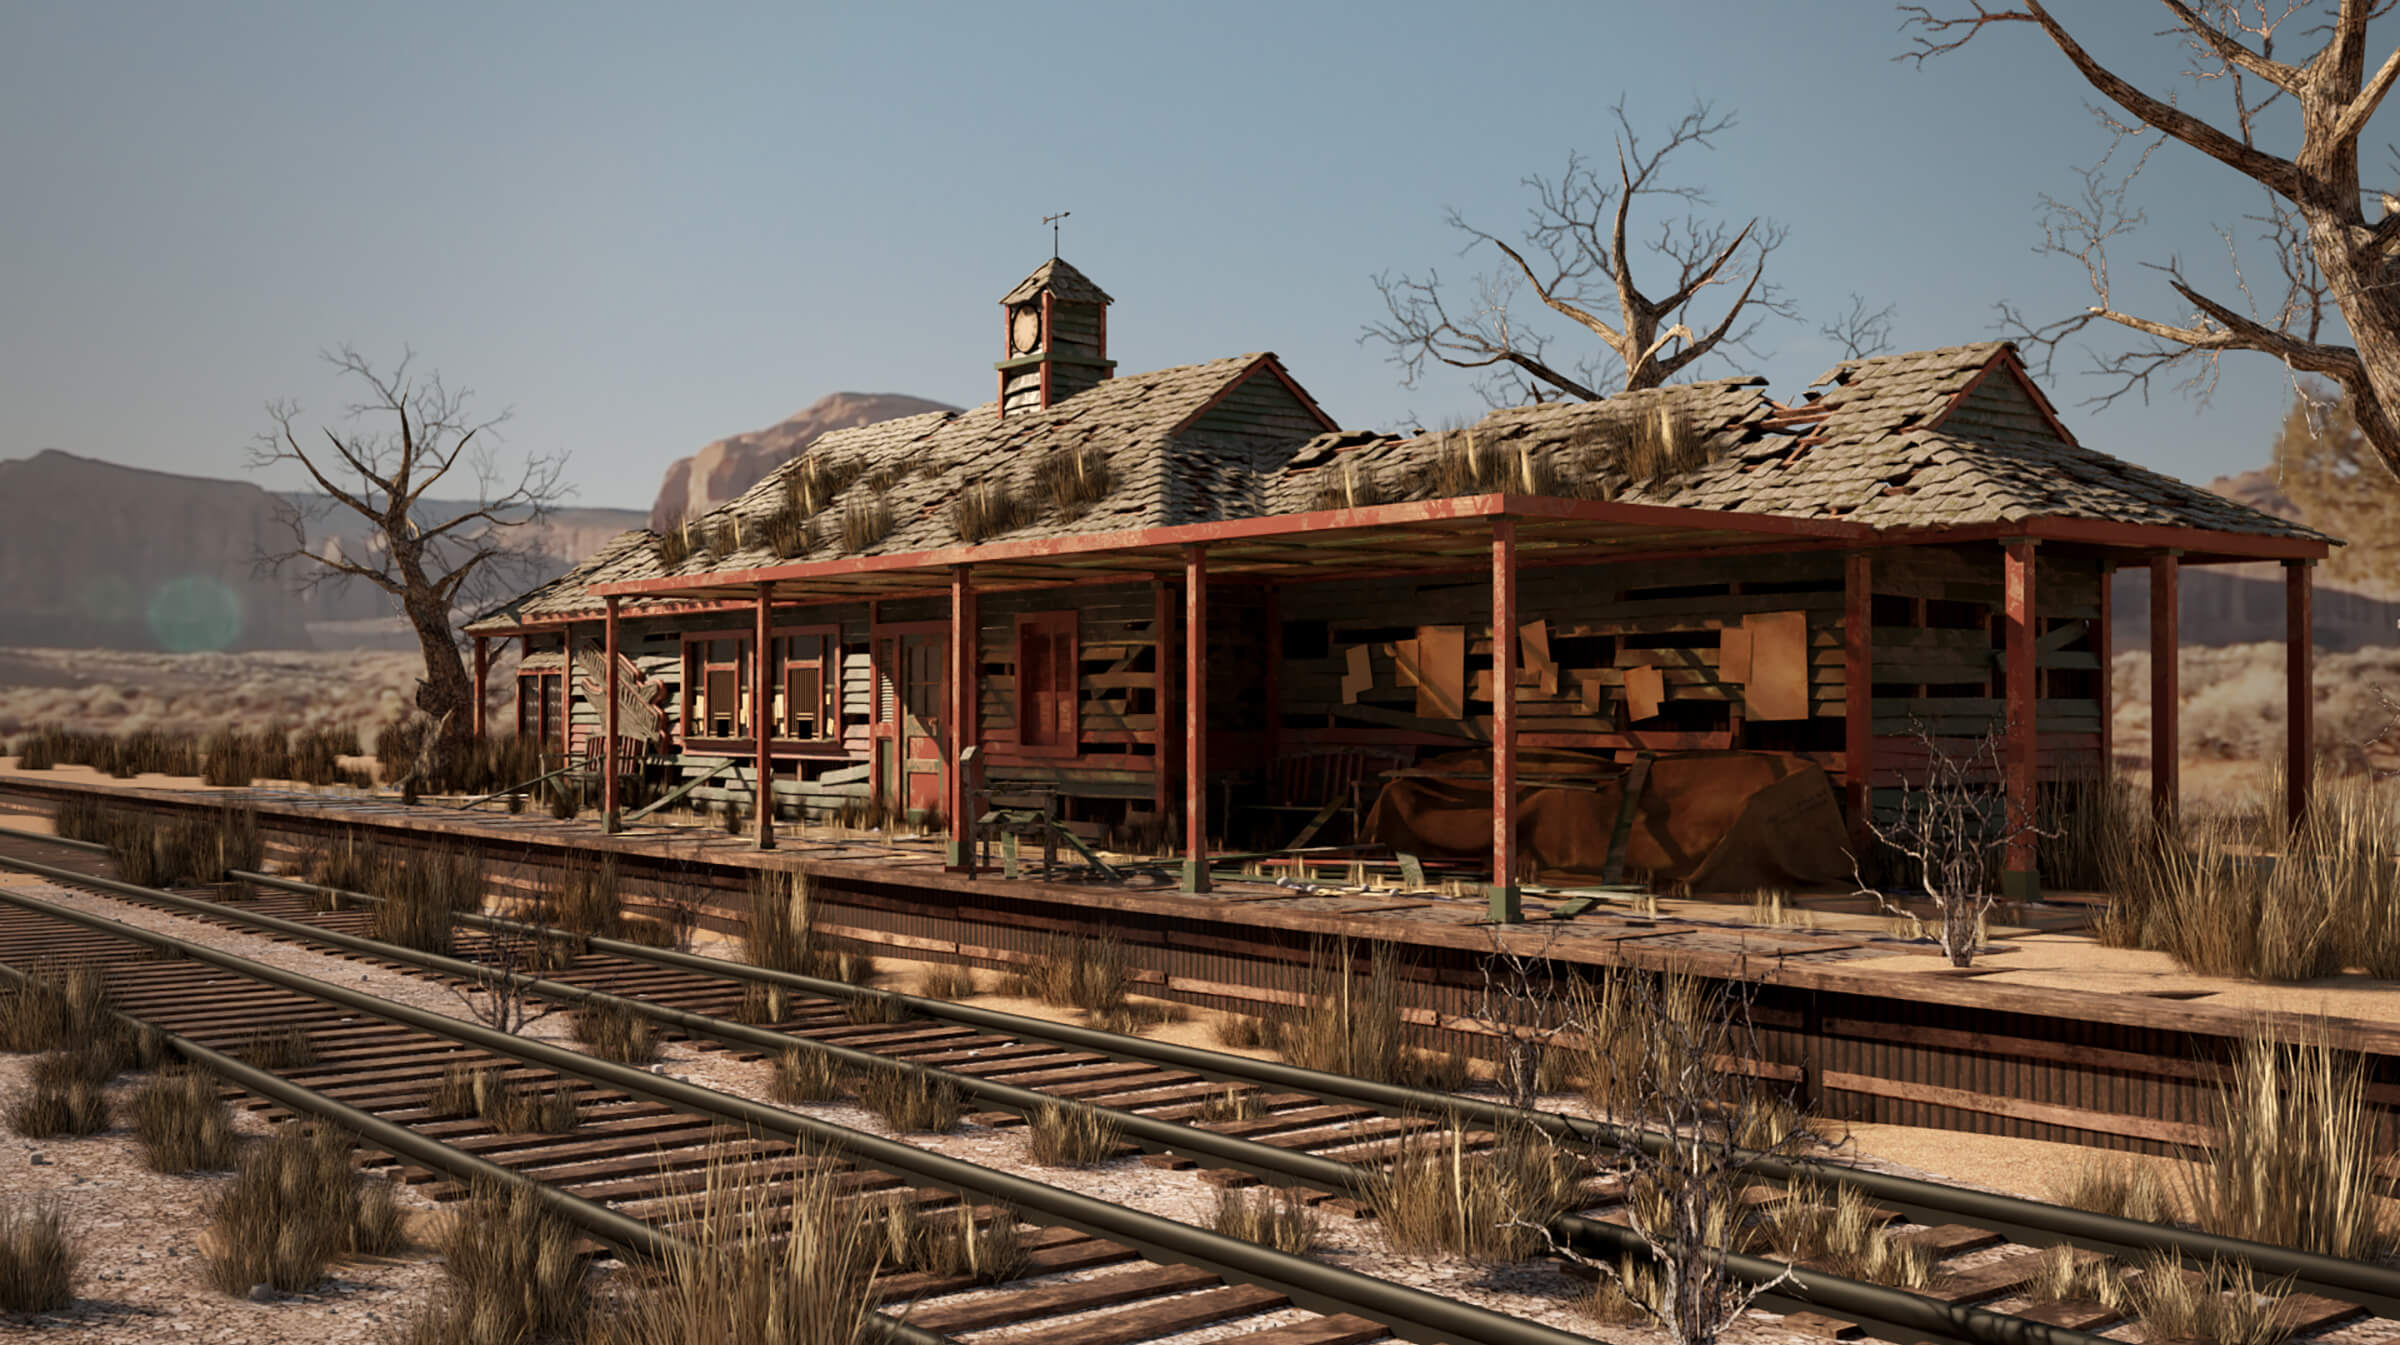 An abandoned train station in the desert